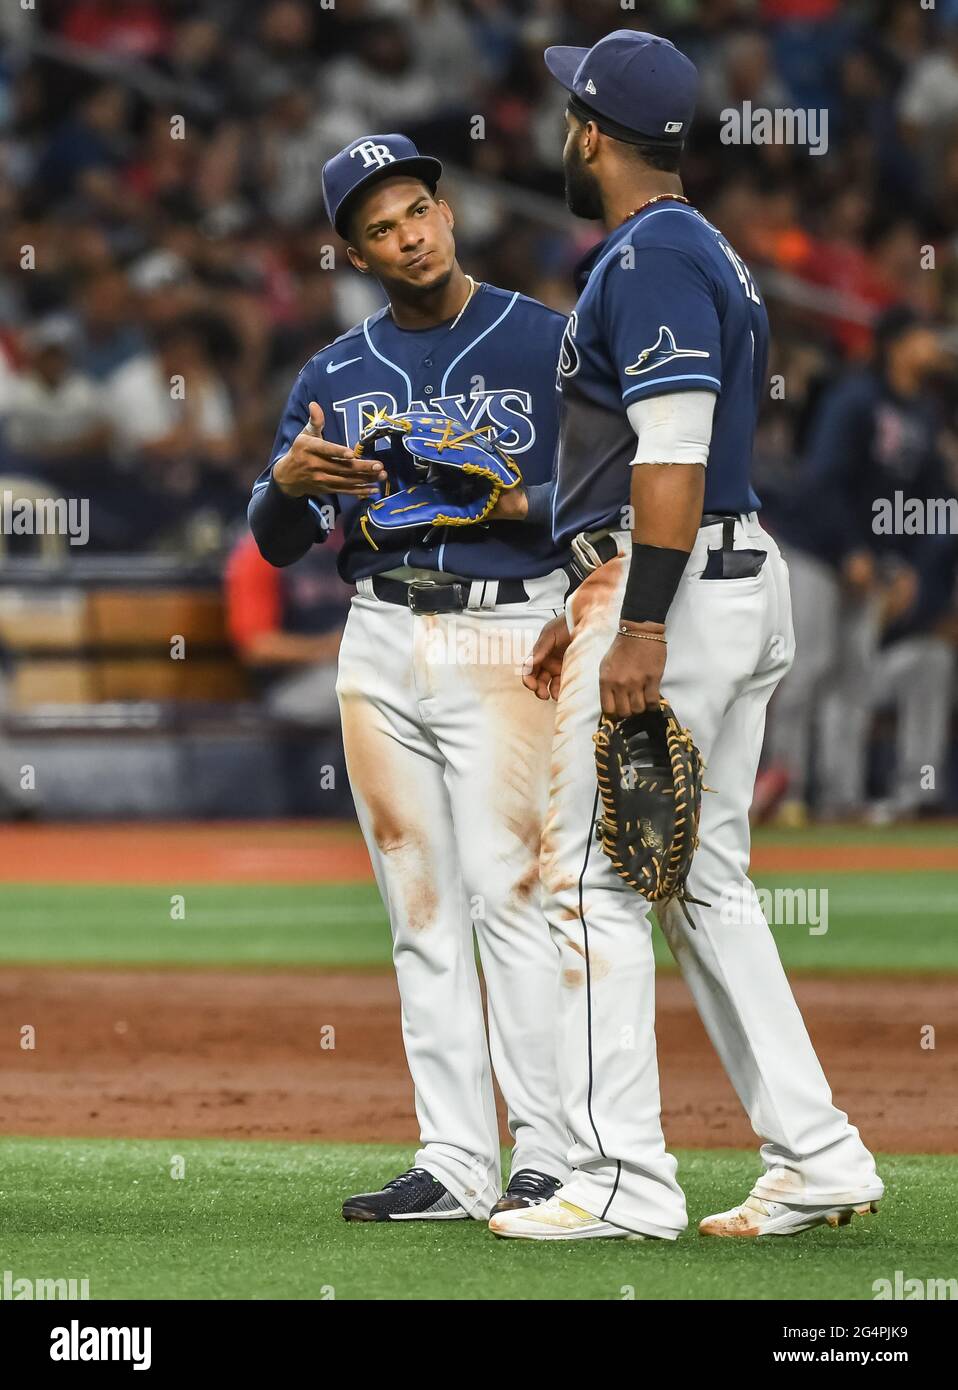 St. Petersburg, United States. 22nd June, 2021. Tampa Bay Rays infielders Wander  Franco (L) and Yandy Diaz (R) talk during a pitching change in the third  inning of a baseball game at